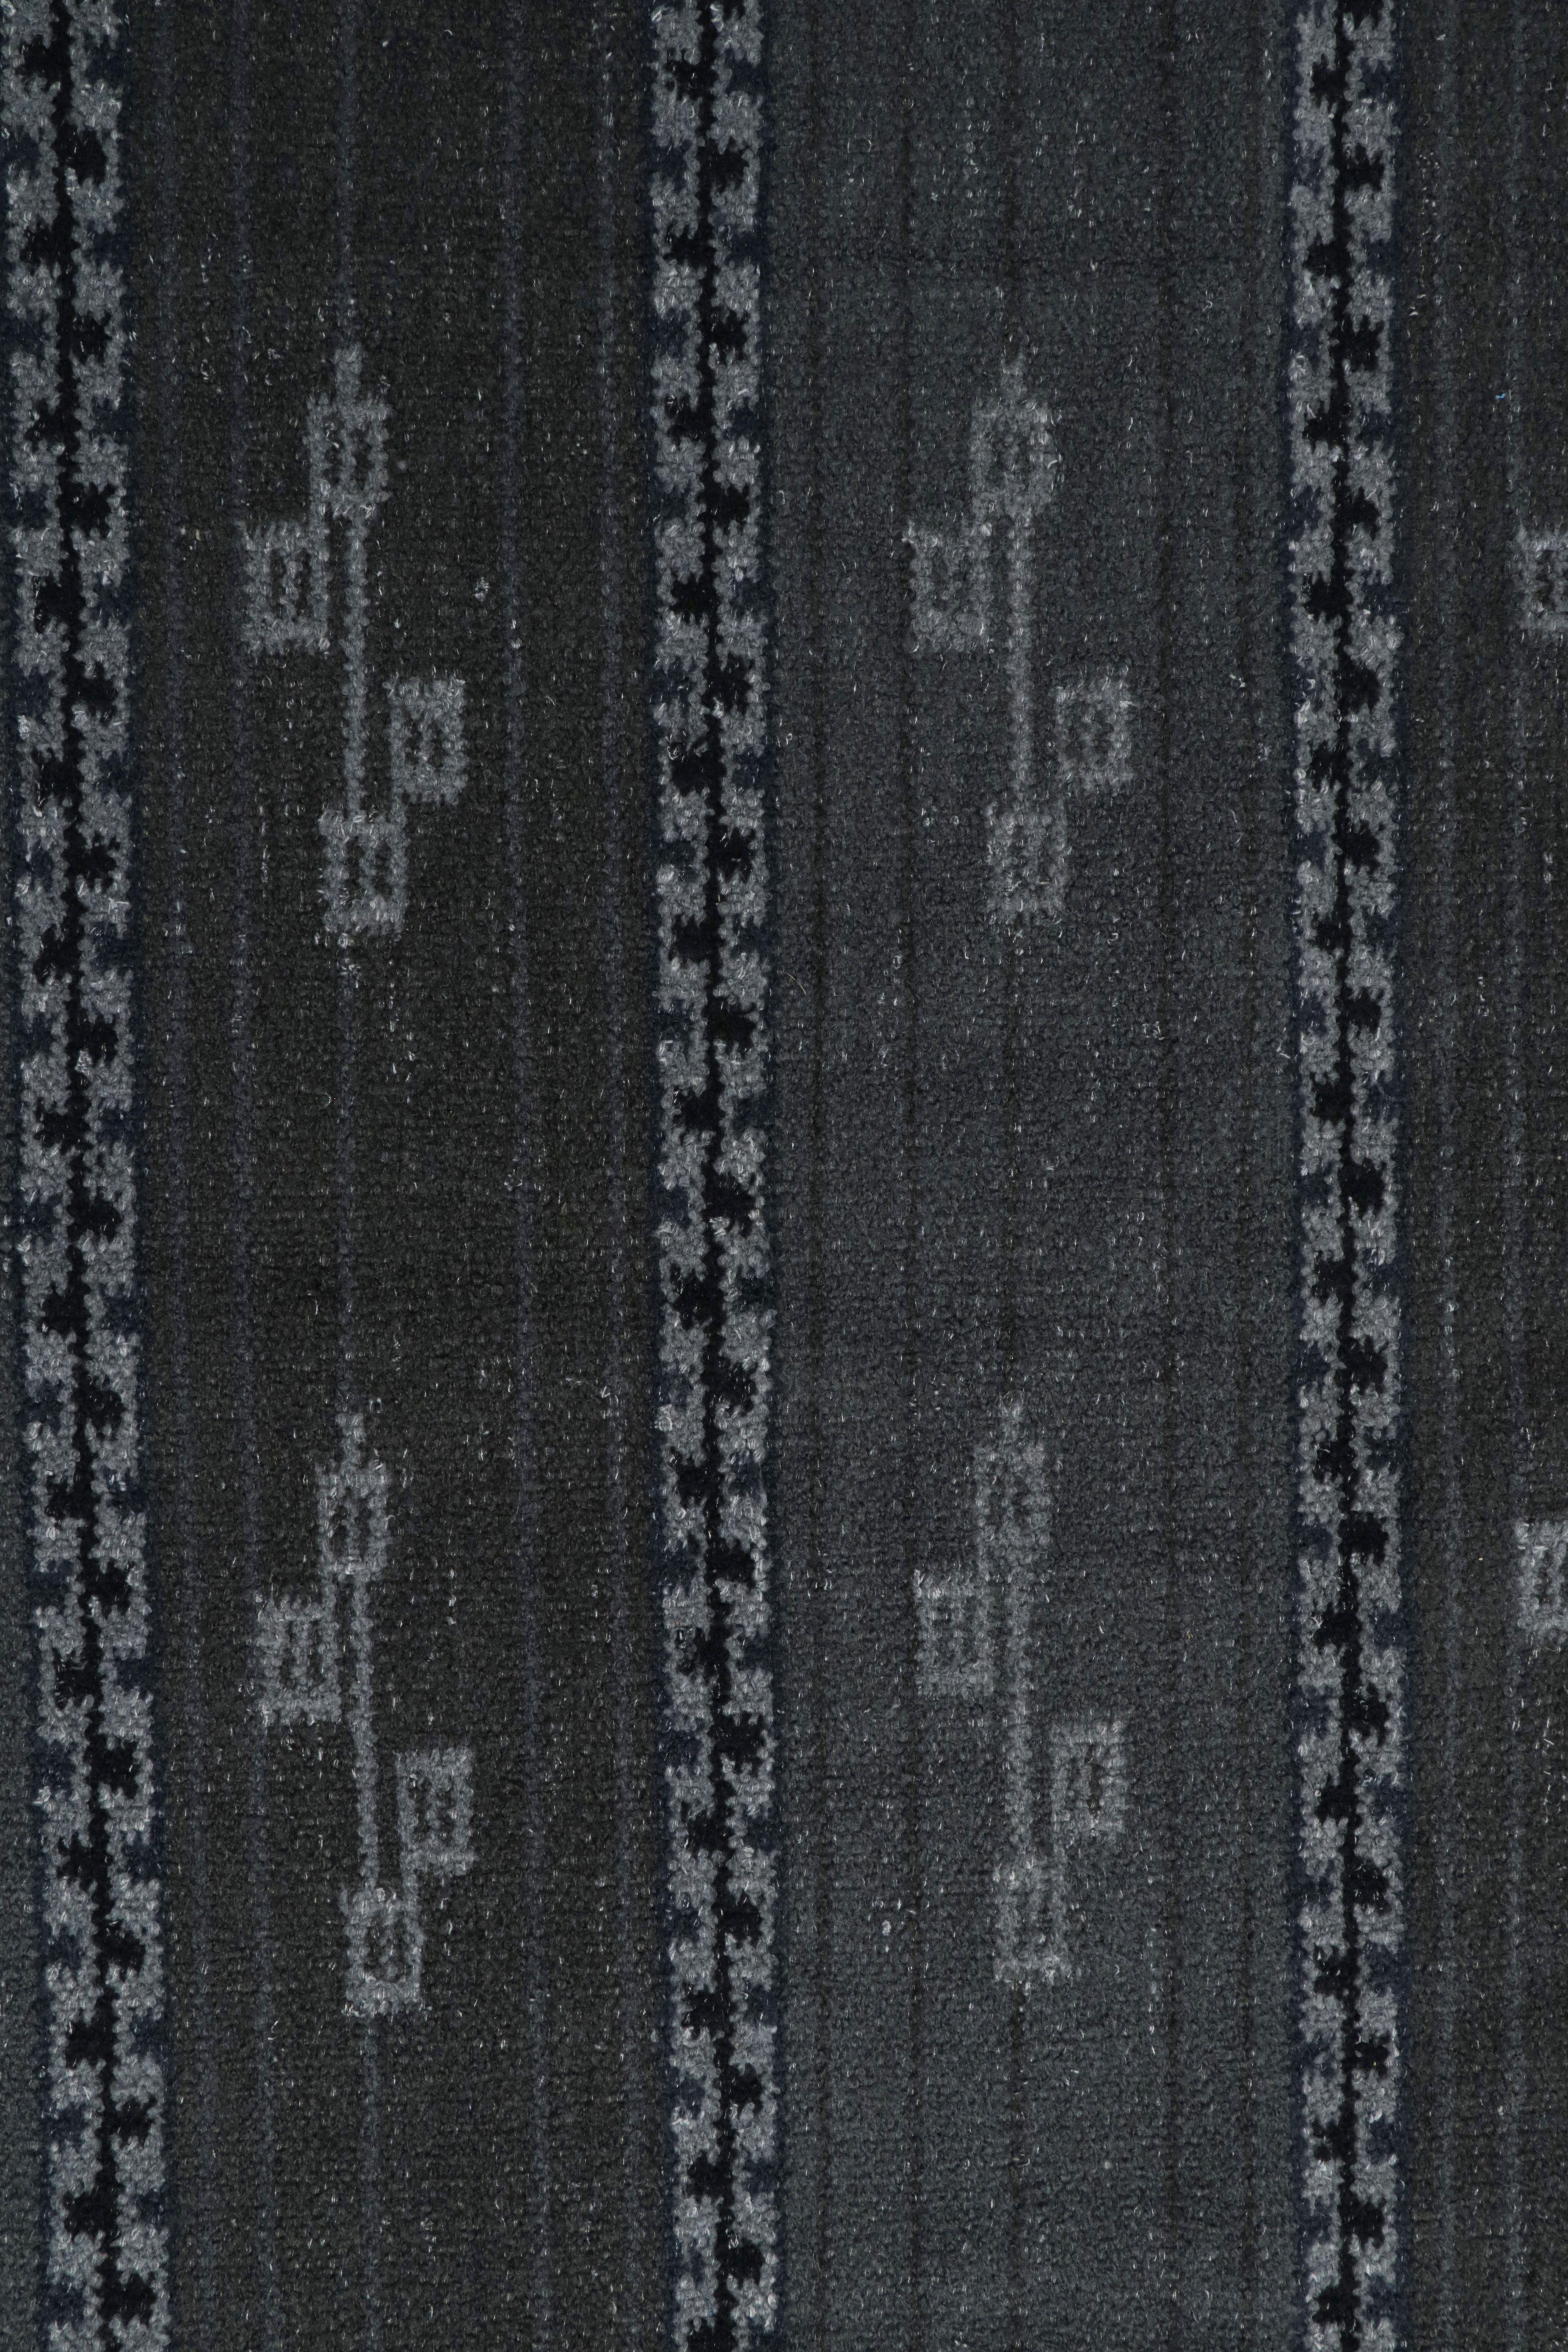 Indian Rug & Kilim’s Scandinavian Style Rug with Gray and Blue Geometric Patterns For Sale